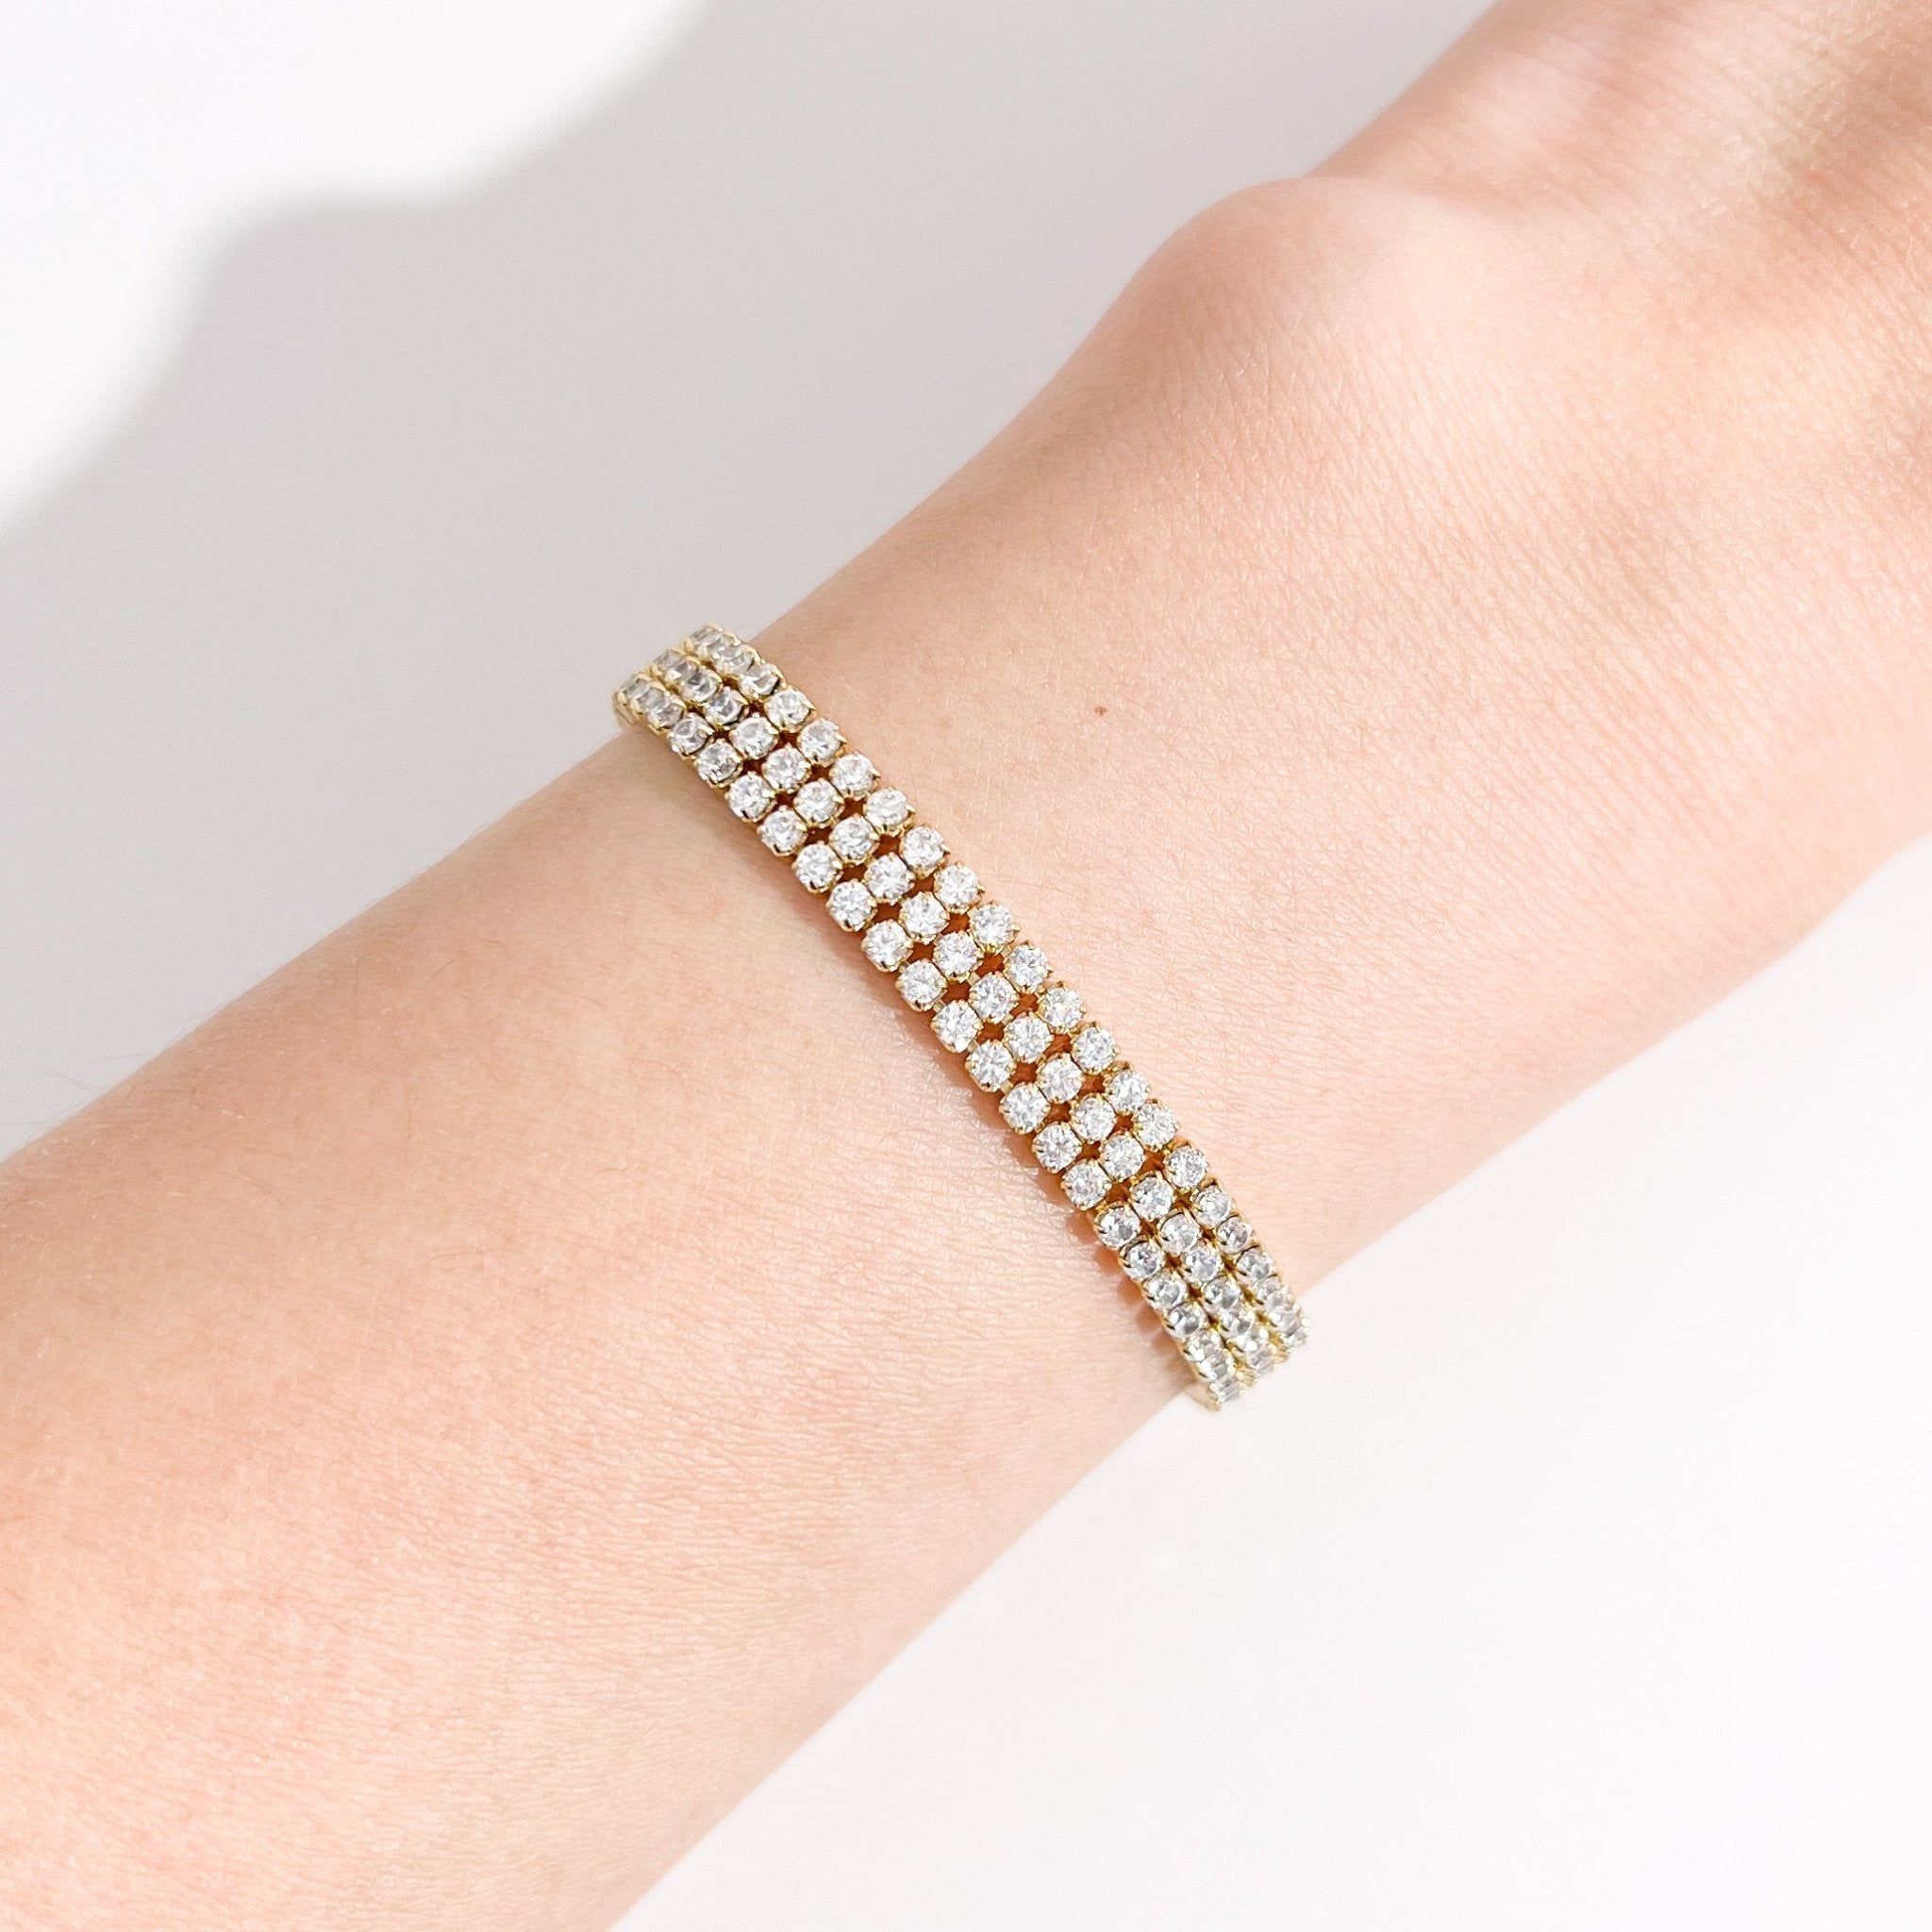 Pave Gems Bracelet in Gold - Flaire & Co.